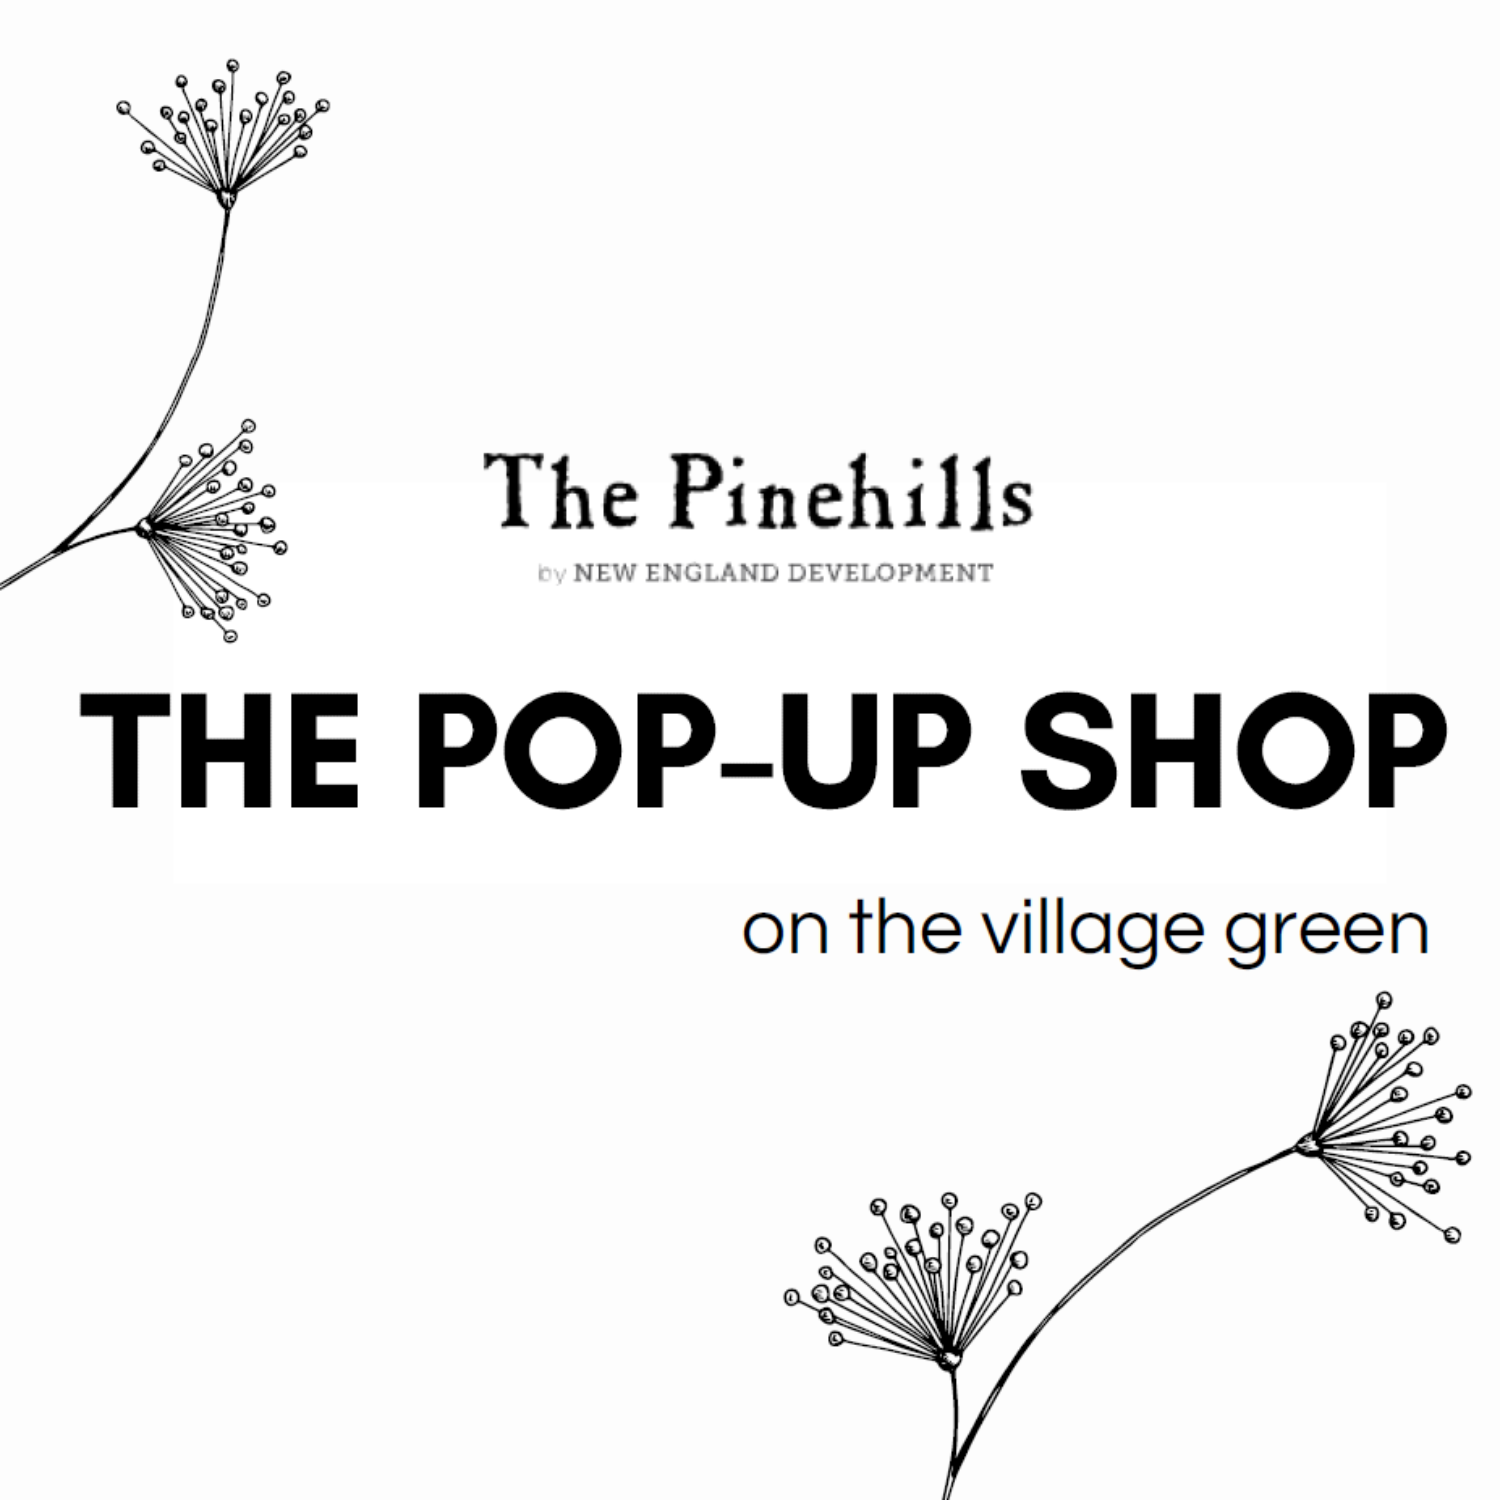 booked. A Pop-Up Bookstore at the Village Green - The Pinehills